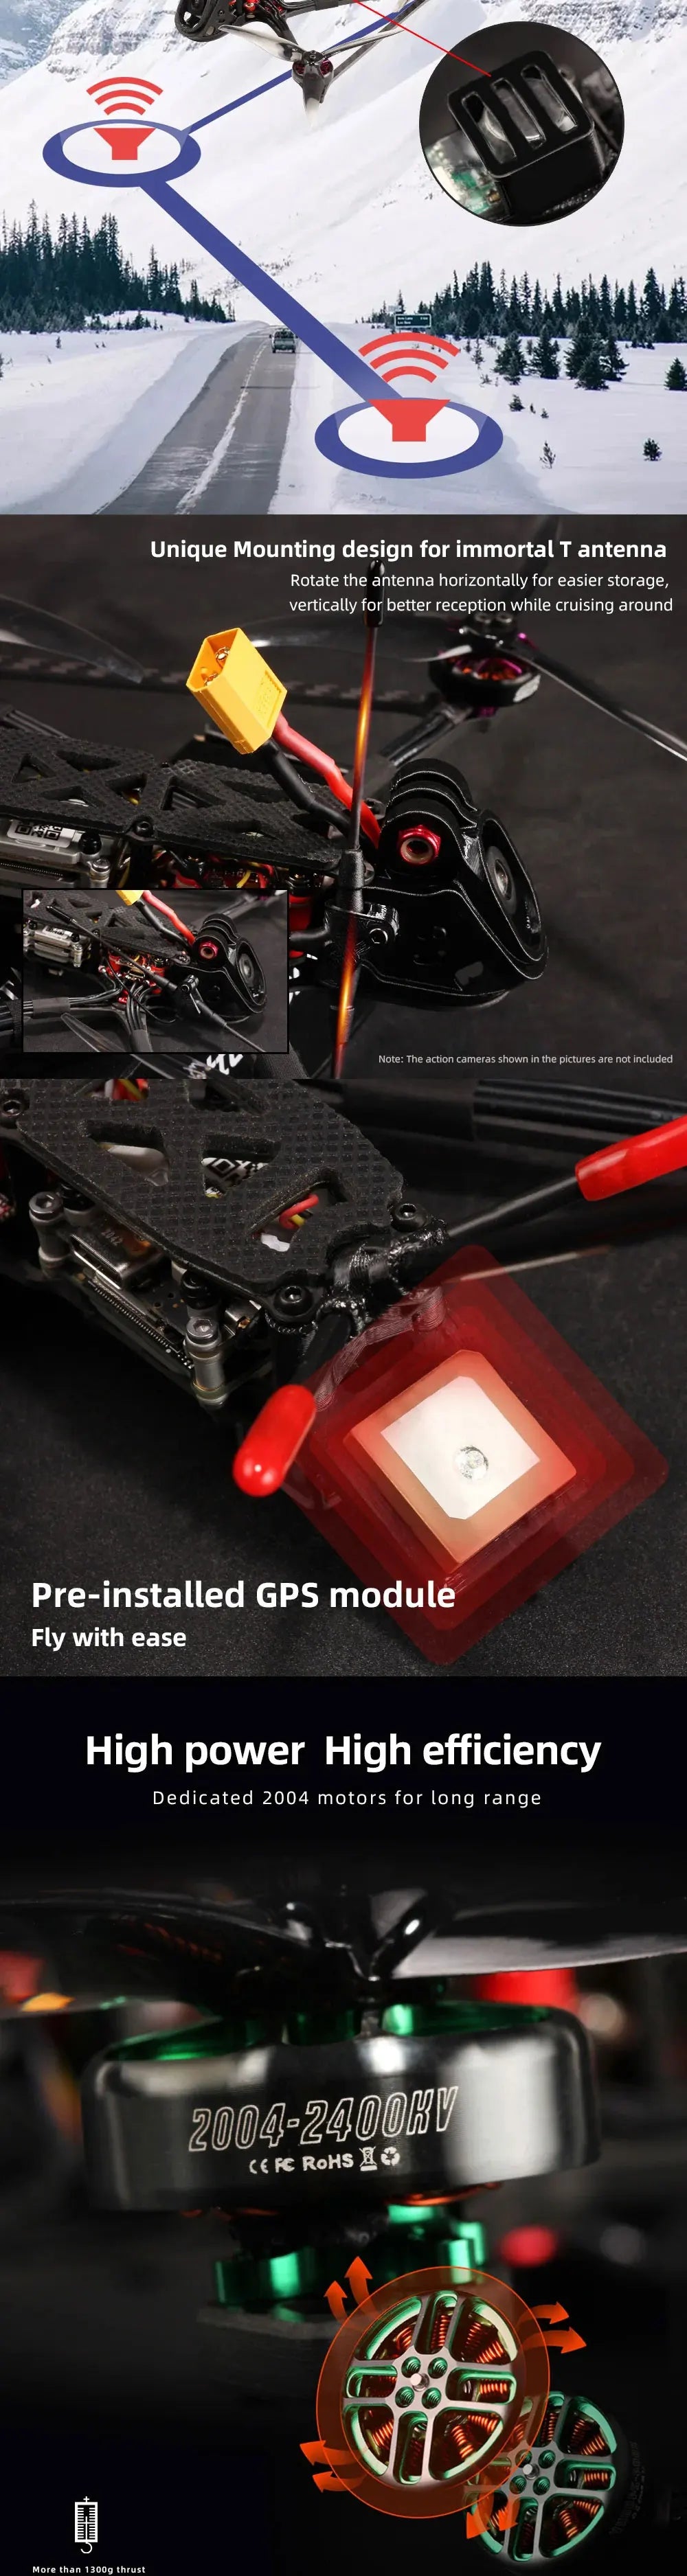 HGLRC Rekon 5 Mini Long Range Quad Digital Version, action cameras shown the pictures are not included Pre-installed GPS module Fly with ease High